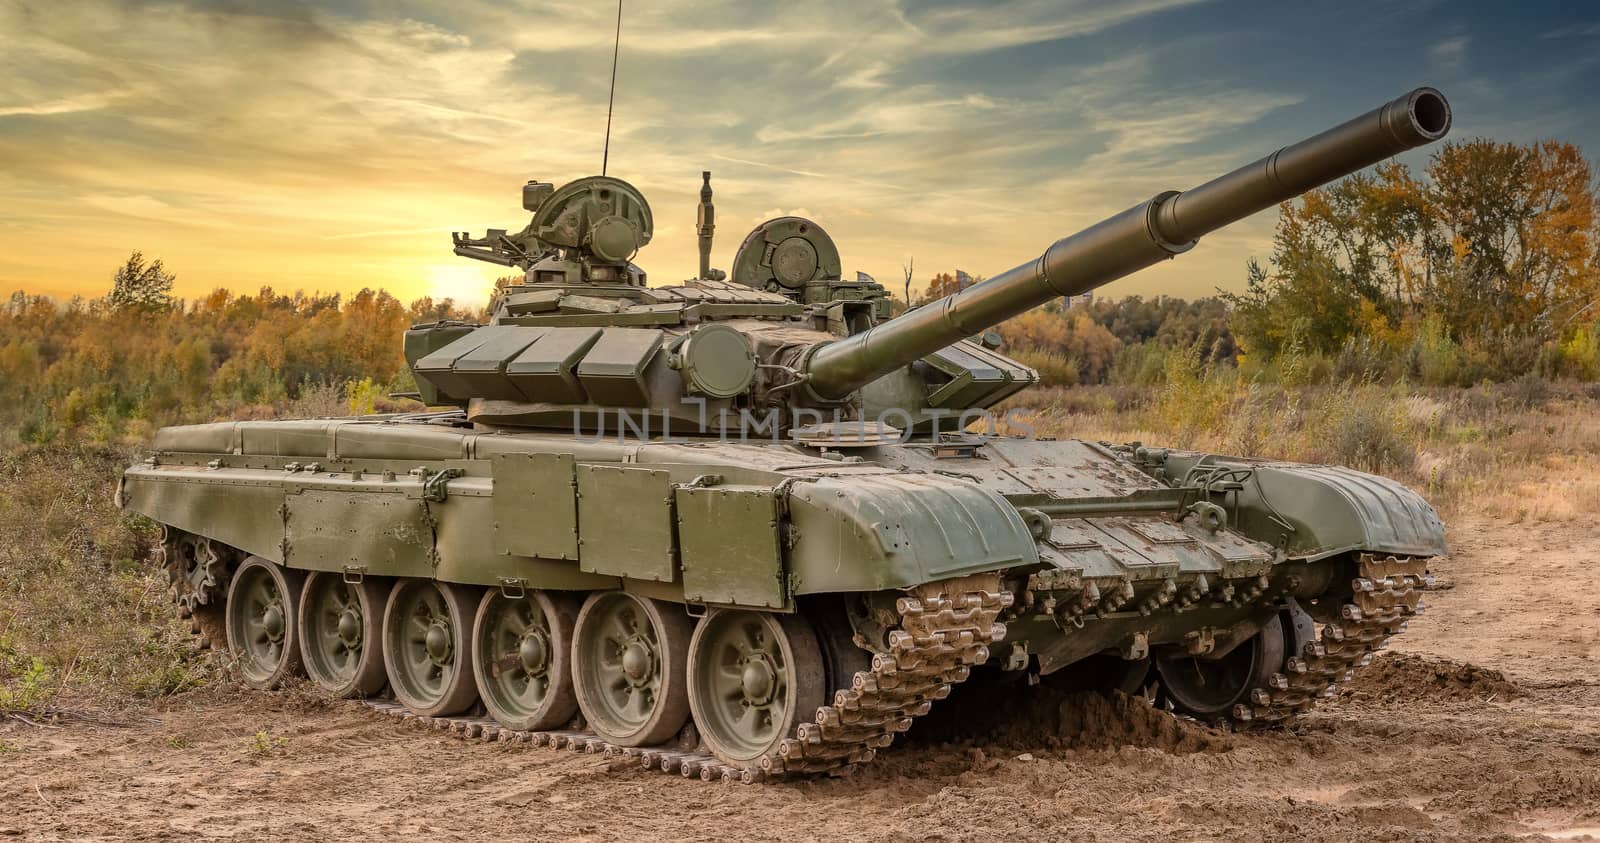 A side shot of russian tank T-64 in the field. Beautiful sunset sky as a background.